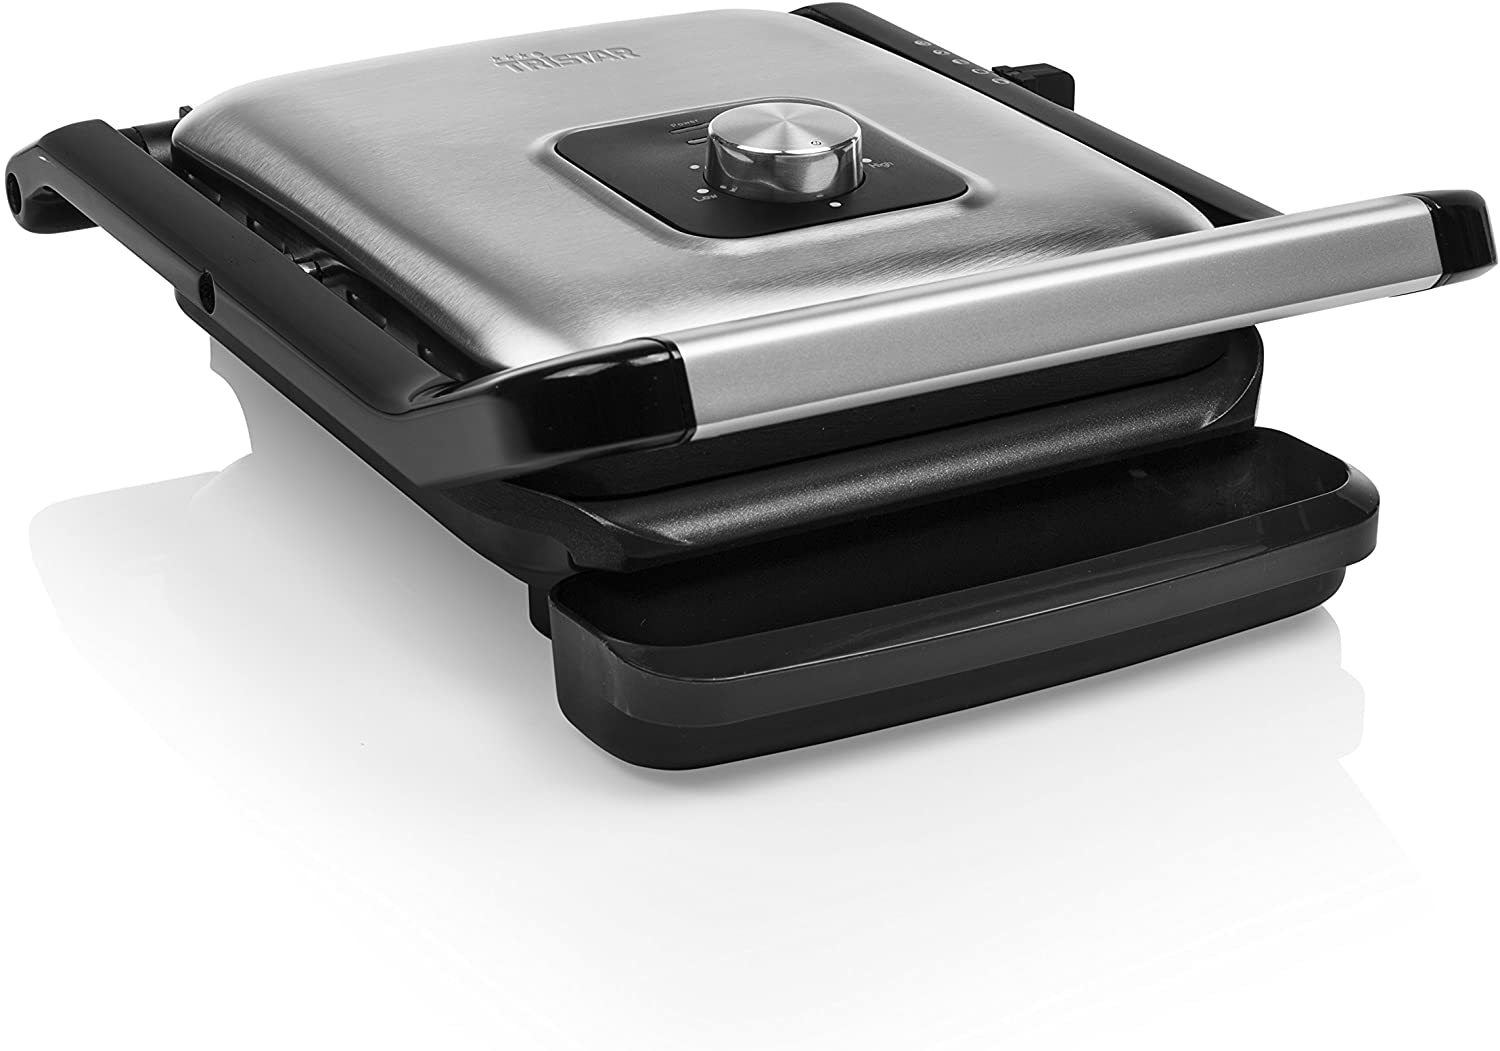 Tristar Barbecue/Panini, Black Stainless Steel